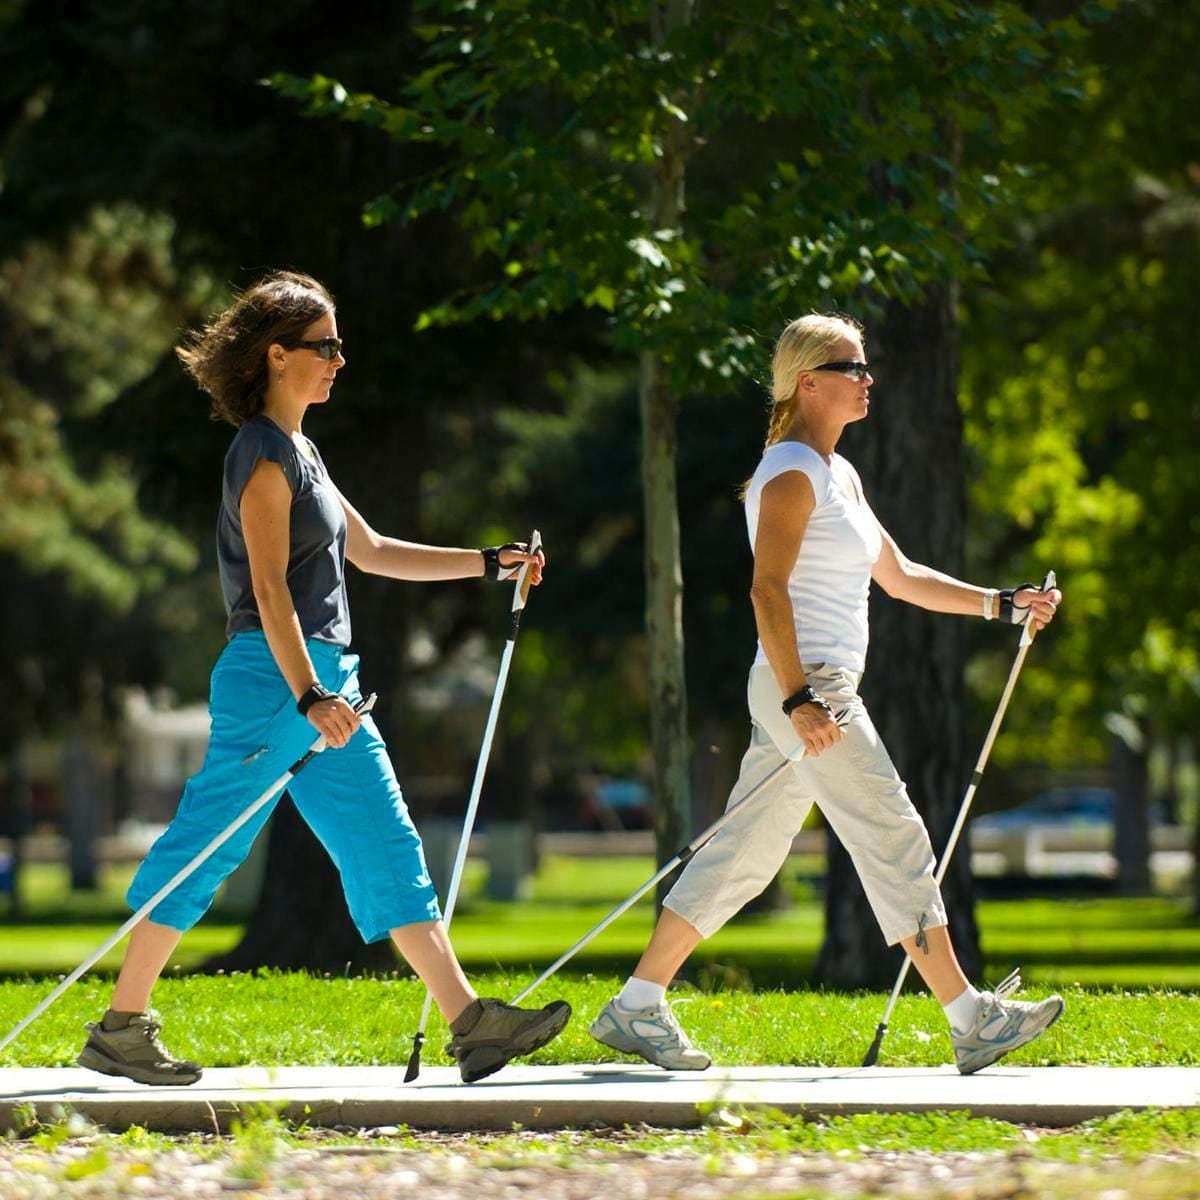 Fast and fun, Nordic walking could be just the activity you need